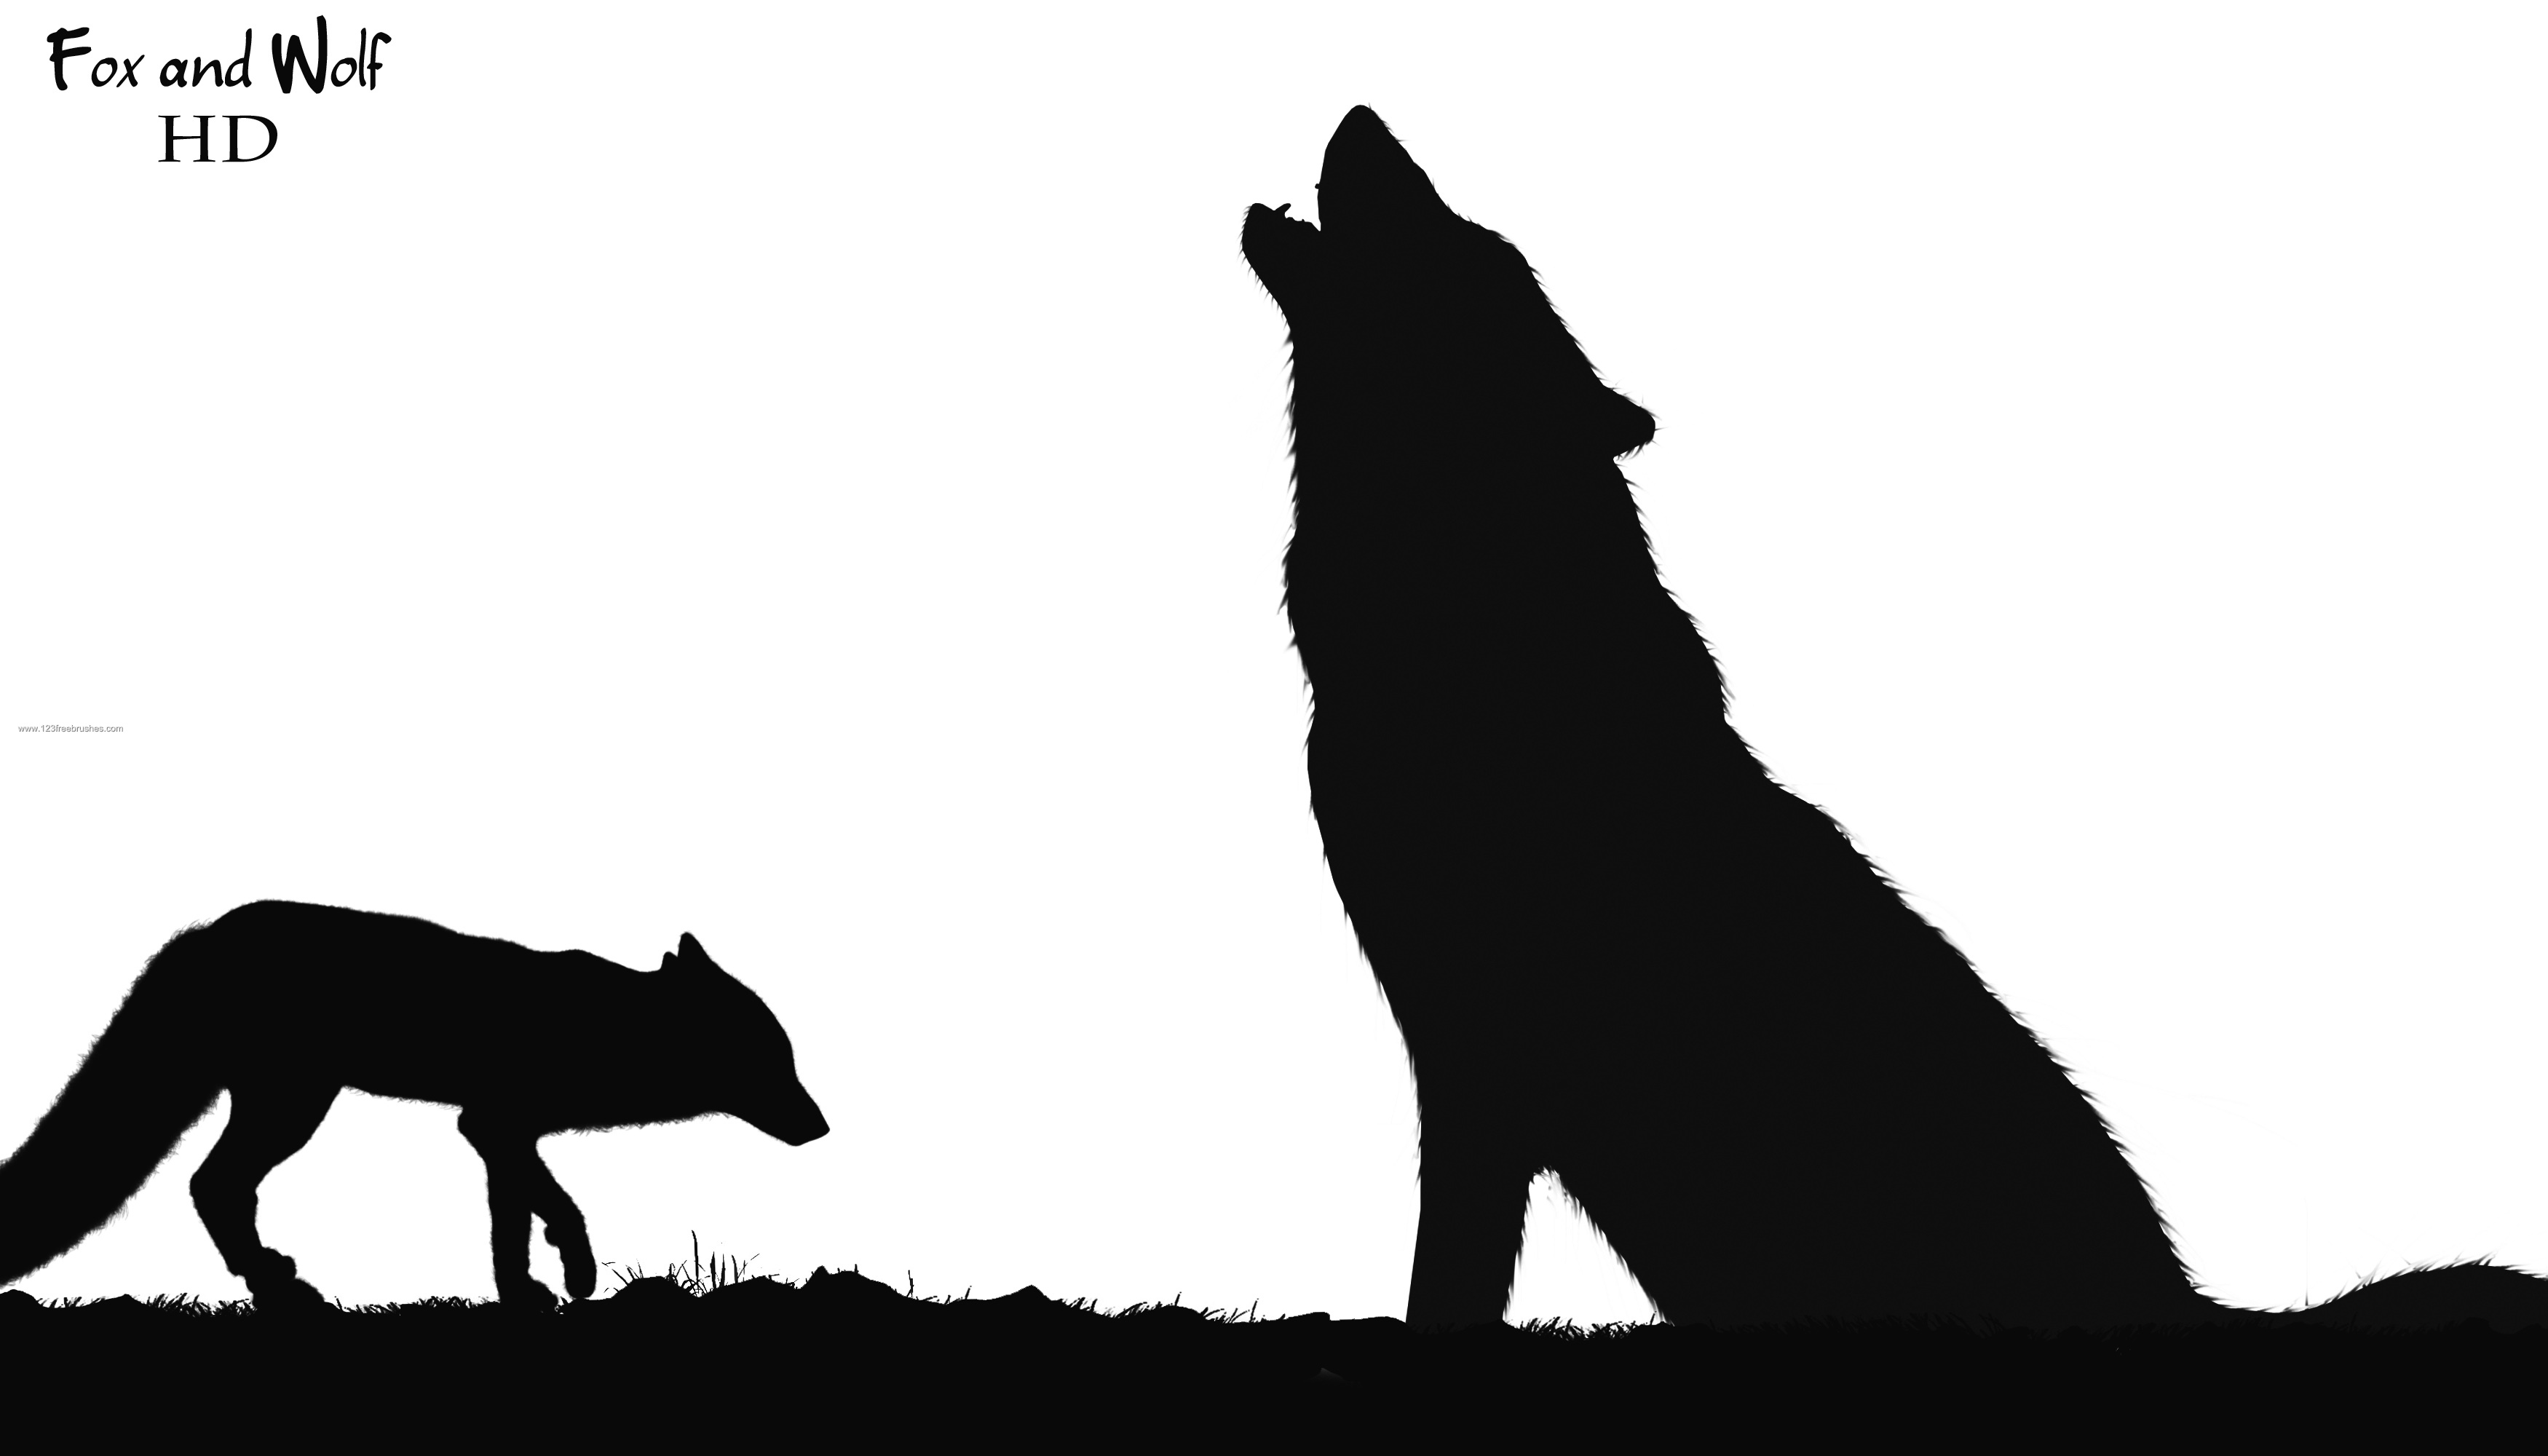 Fox and Wolf Silhouettes